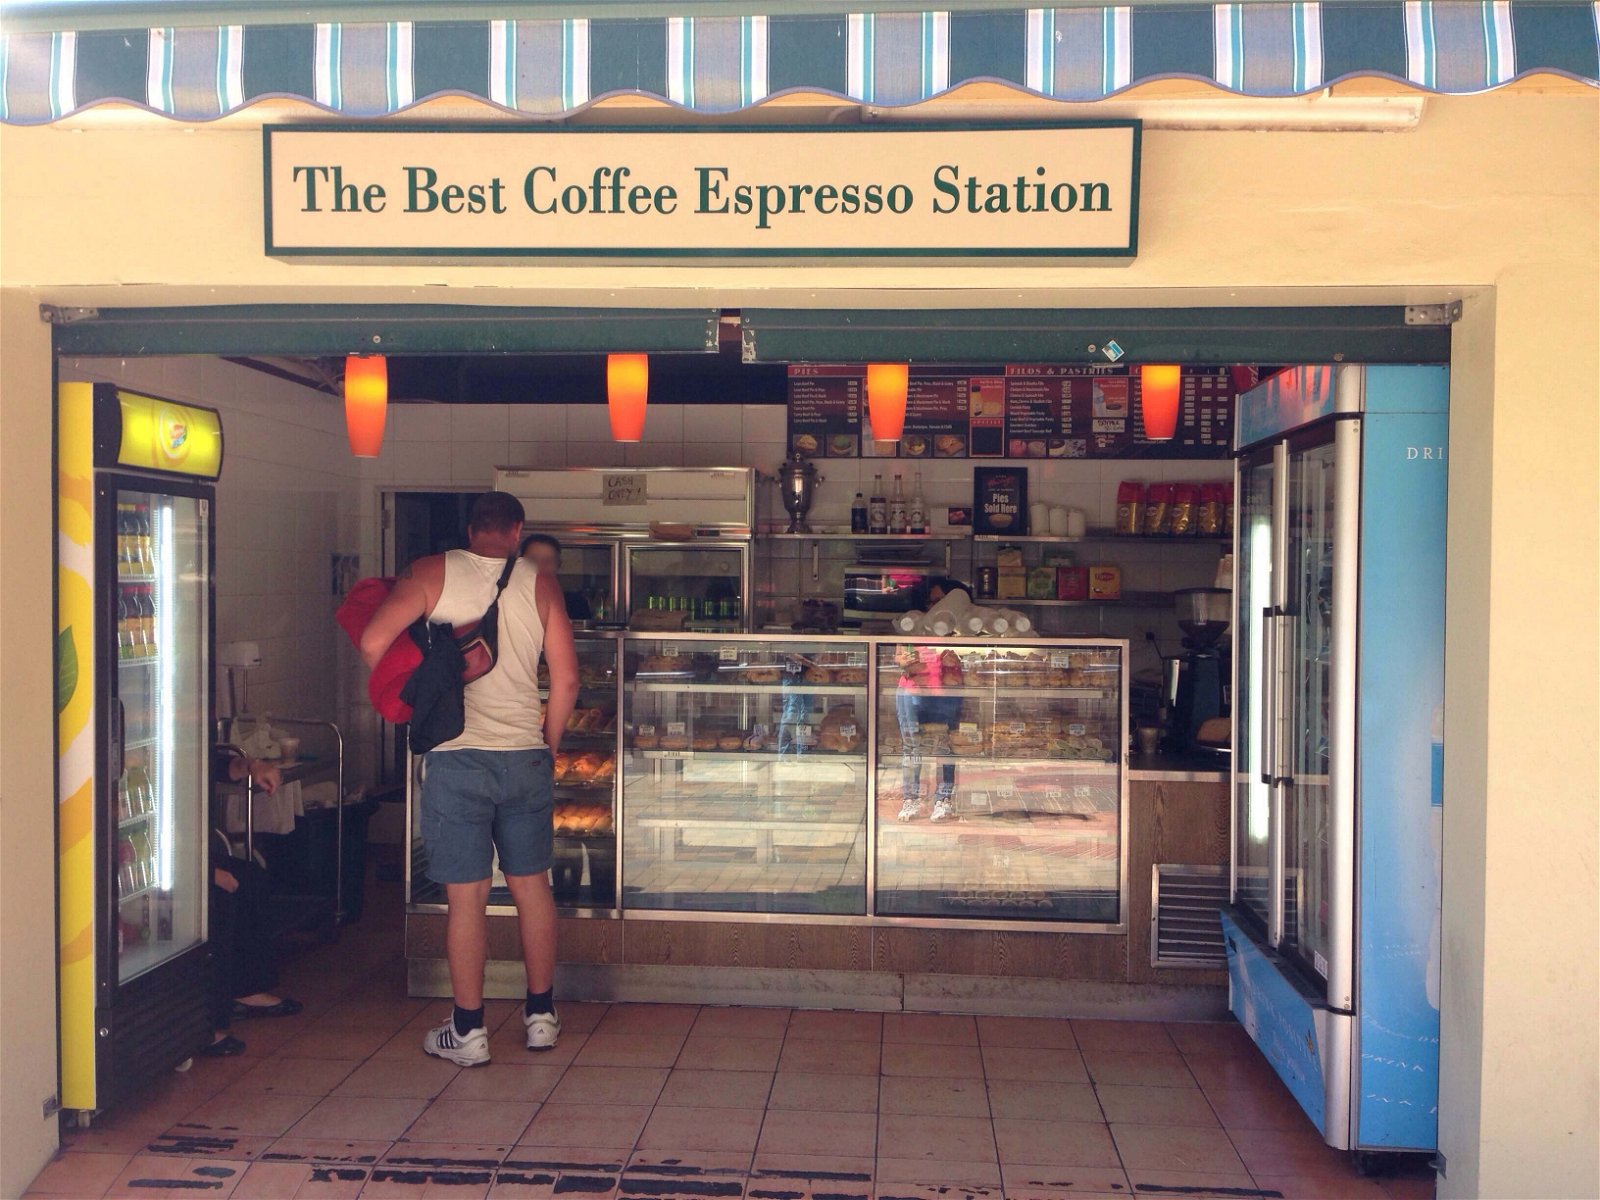 The Best Coffee Espresso Station - Pubs Sydney